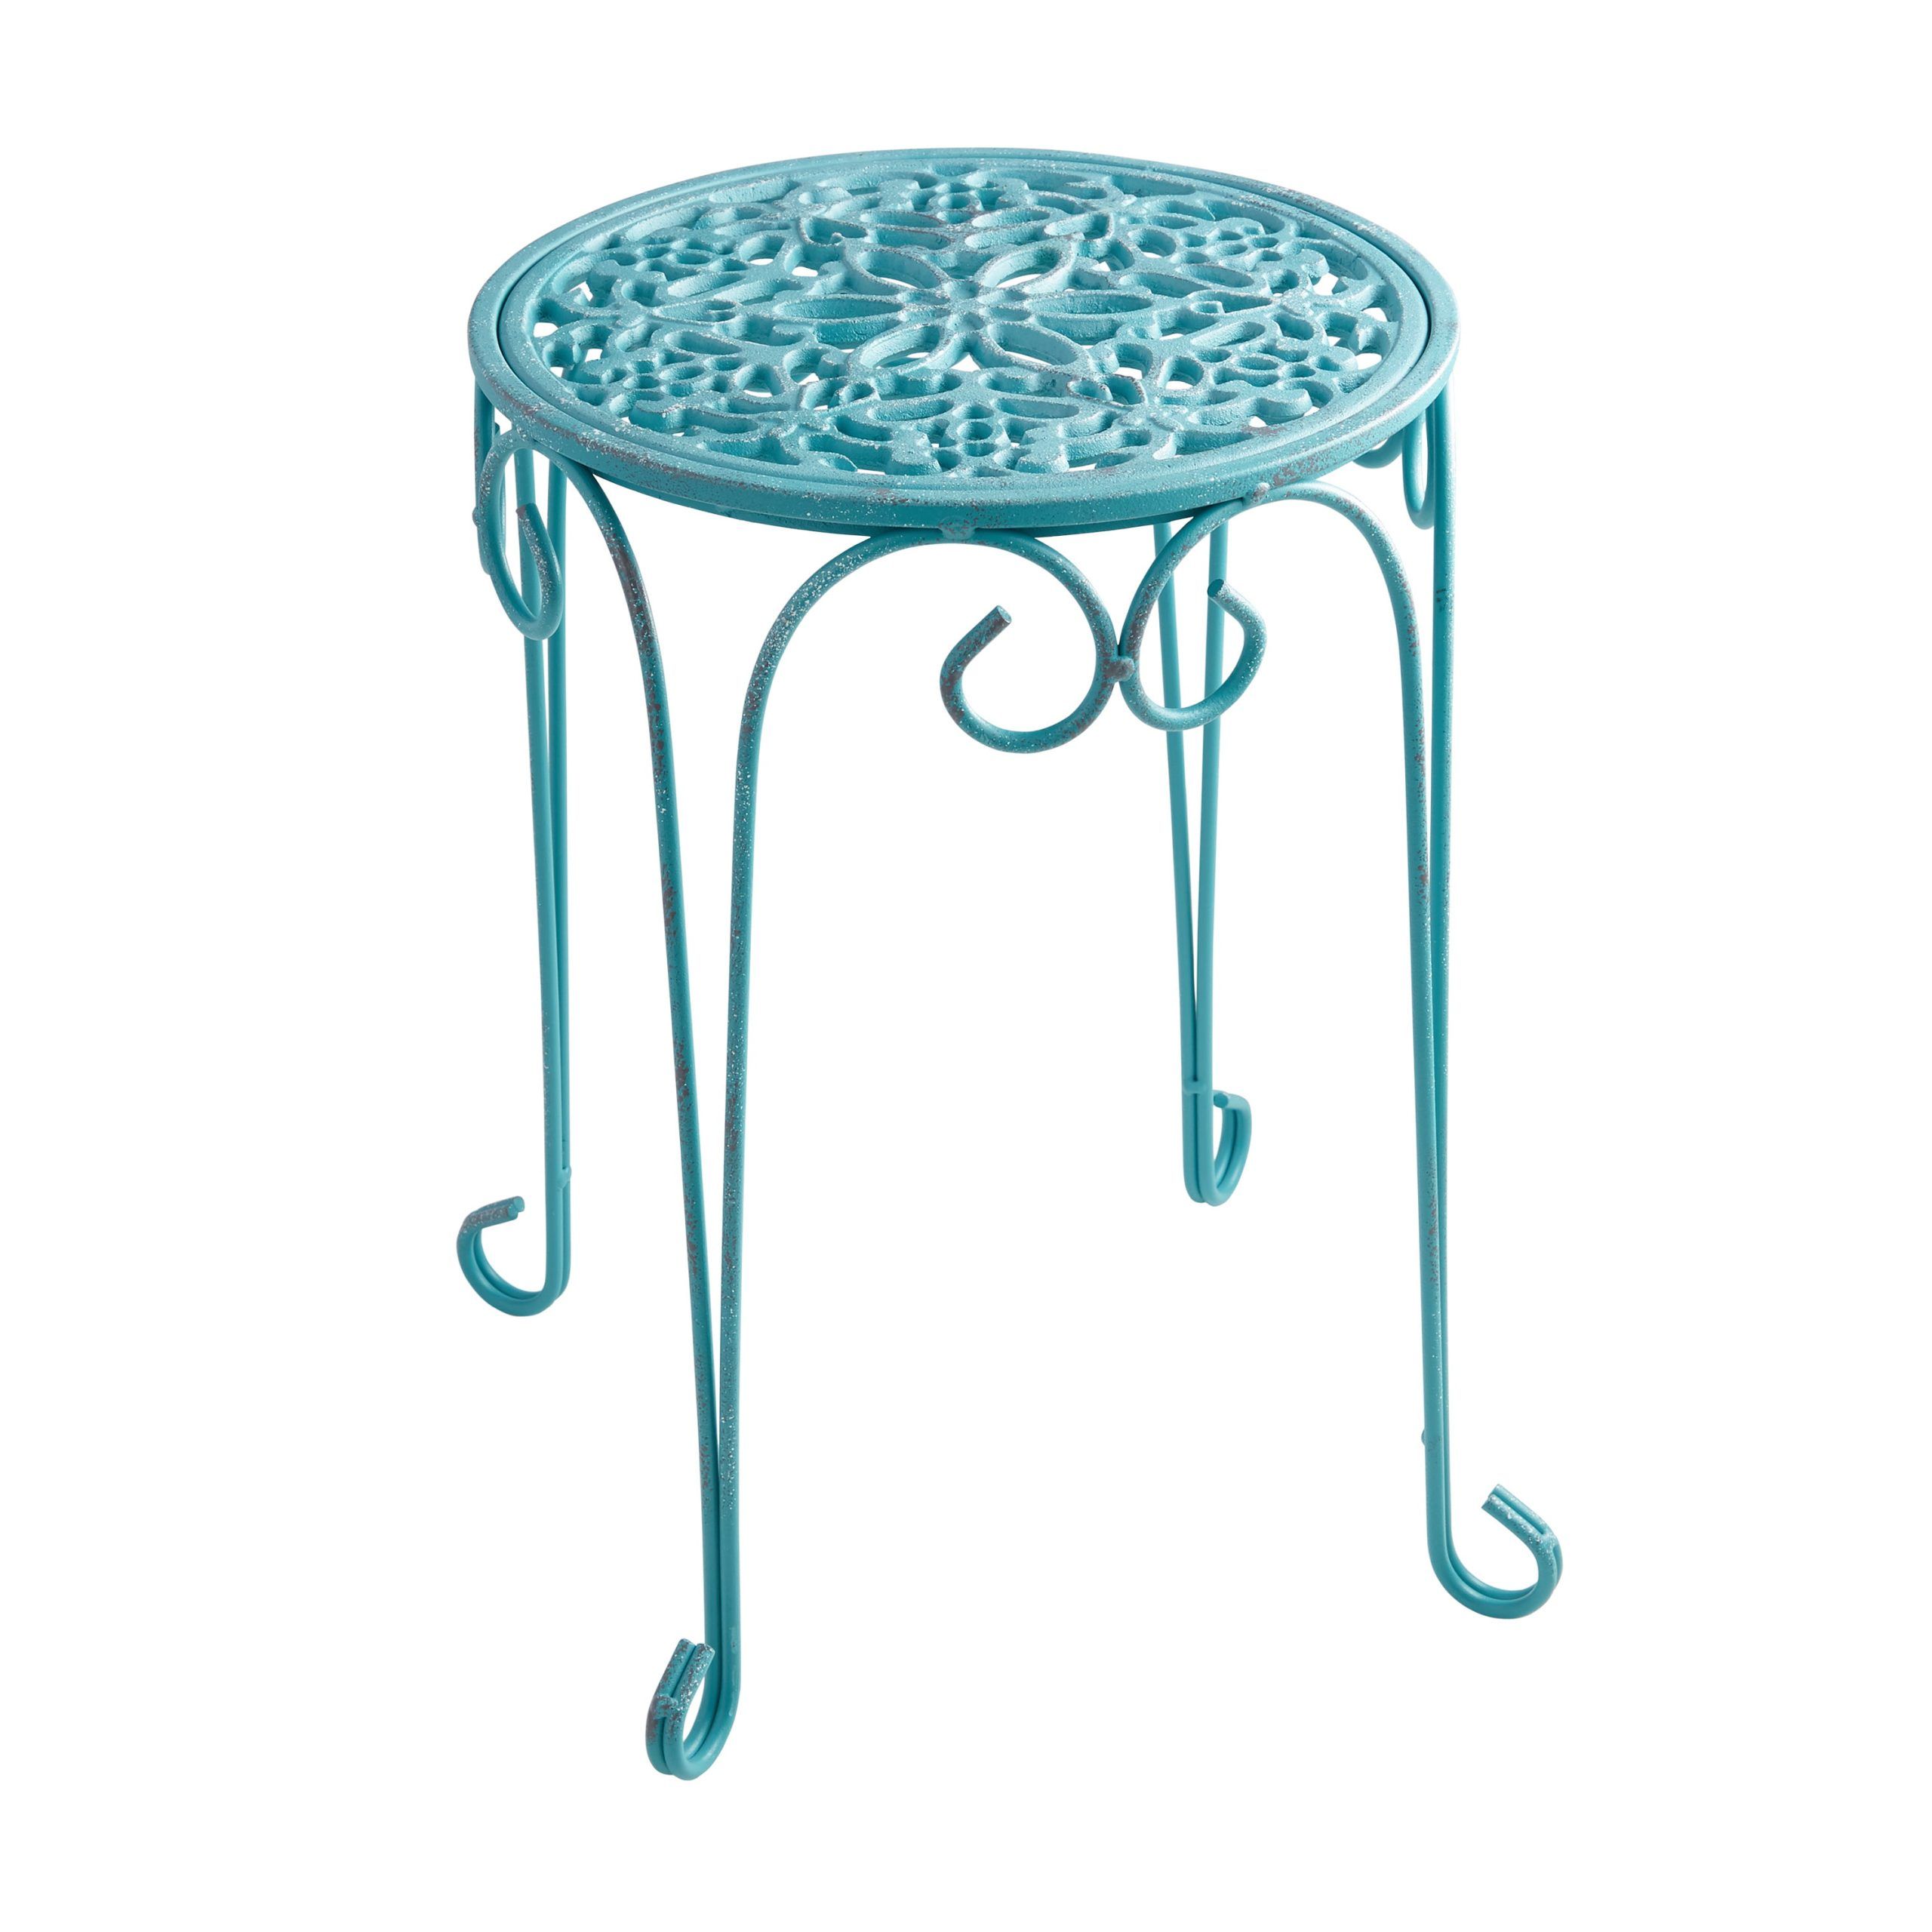 The Pioneer Woman 16" Cast Iron Plant Stand Teal Color With Distressed  Finish – Walmart Throughout Most Current 16 Inch Plant Stands (View 8 of 10)